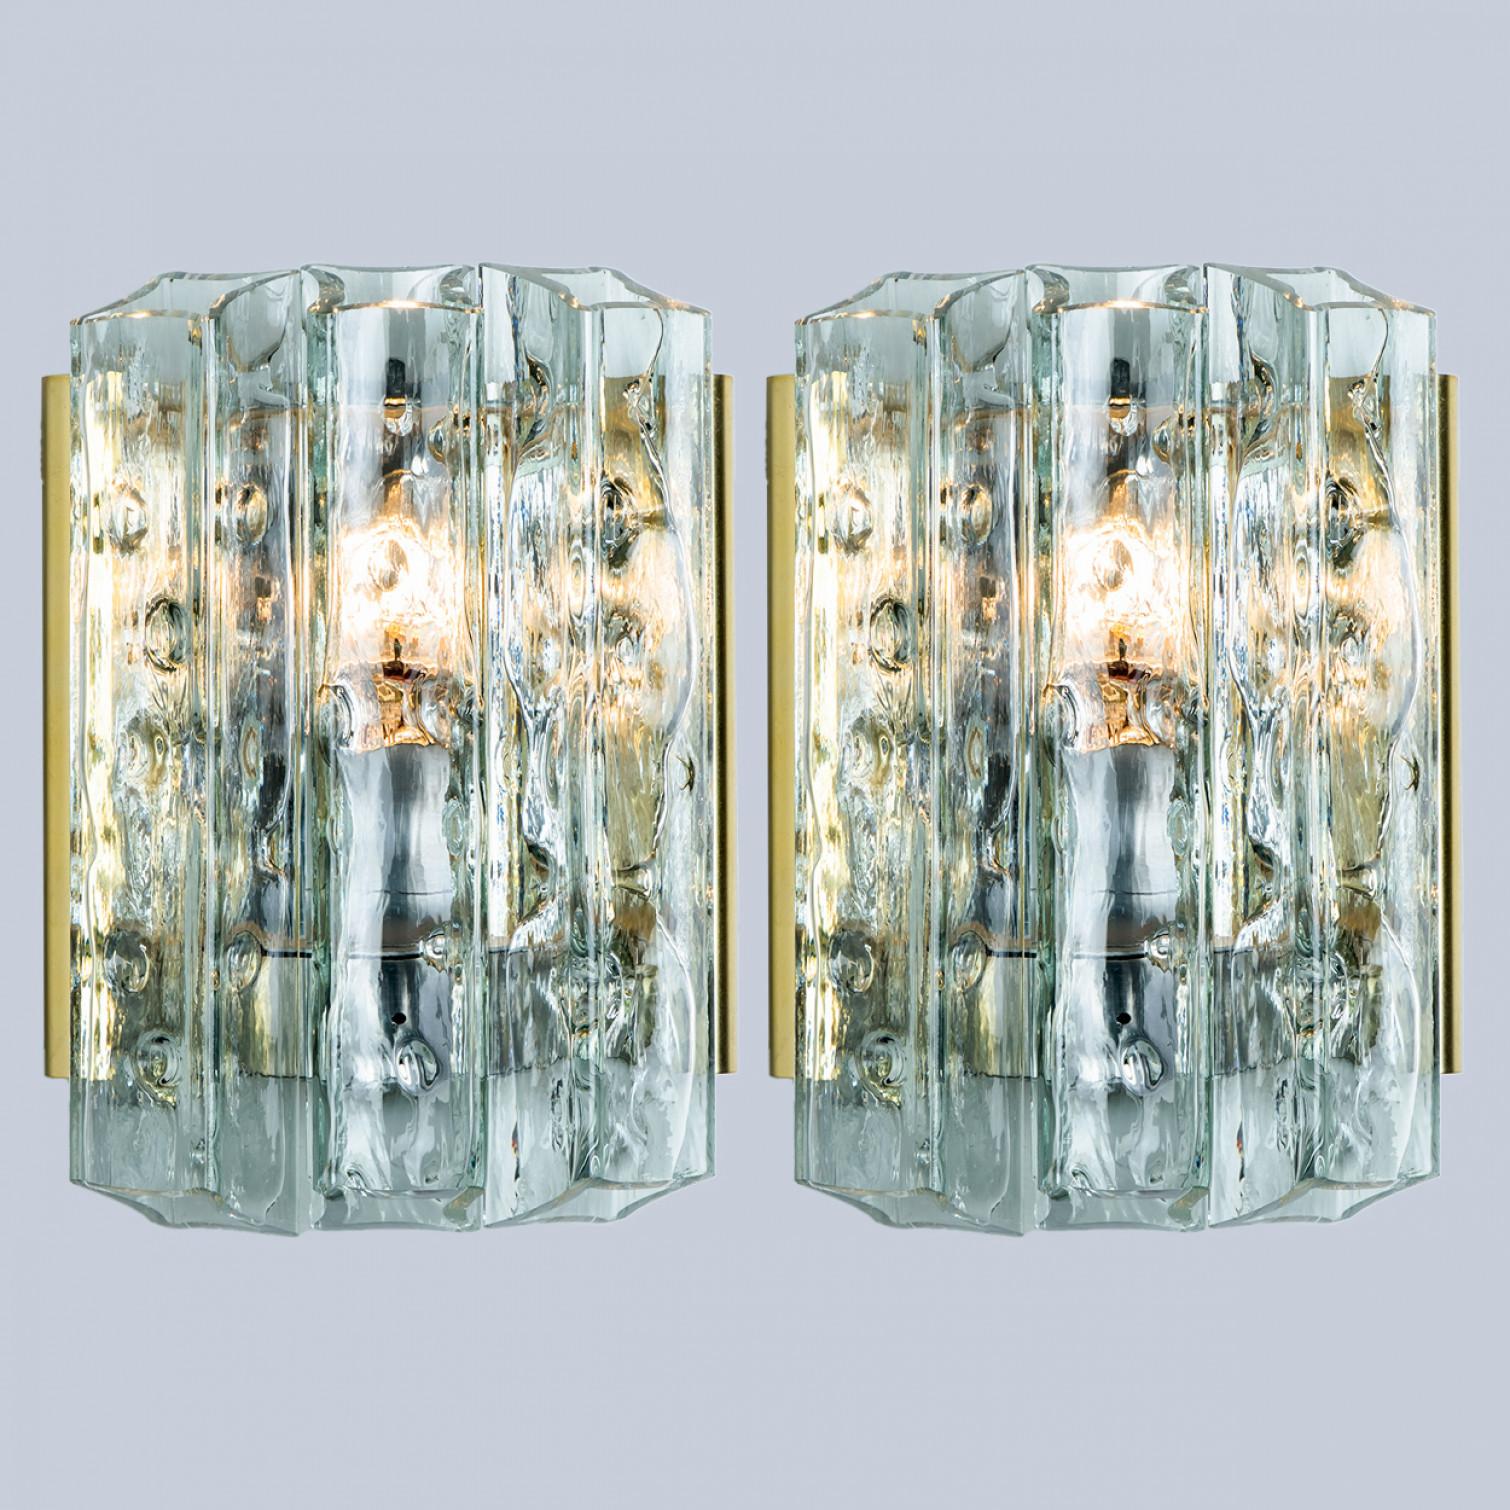 Pair of wonderful hand blown Doria wall lamps. Manufactured in the 1960s. With textured and clear and gold structured glass pipes.
The stylish elegance of this lamp suits many environments, from mid century to Hollywood Regency, from Danish modern